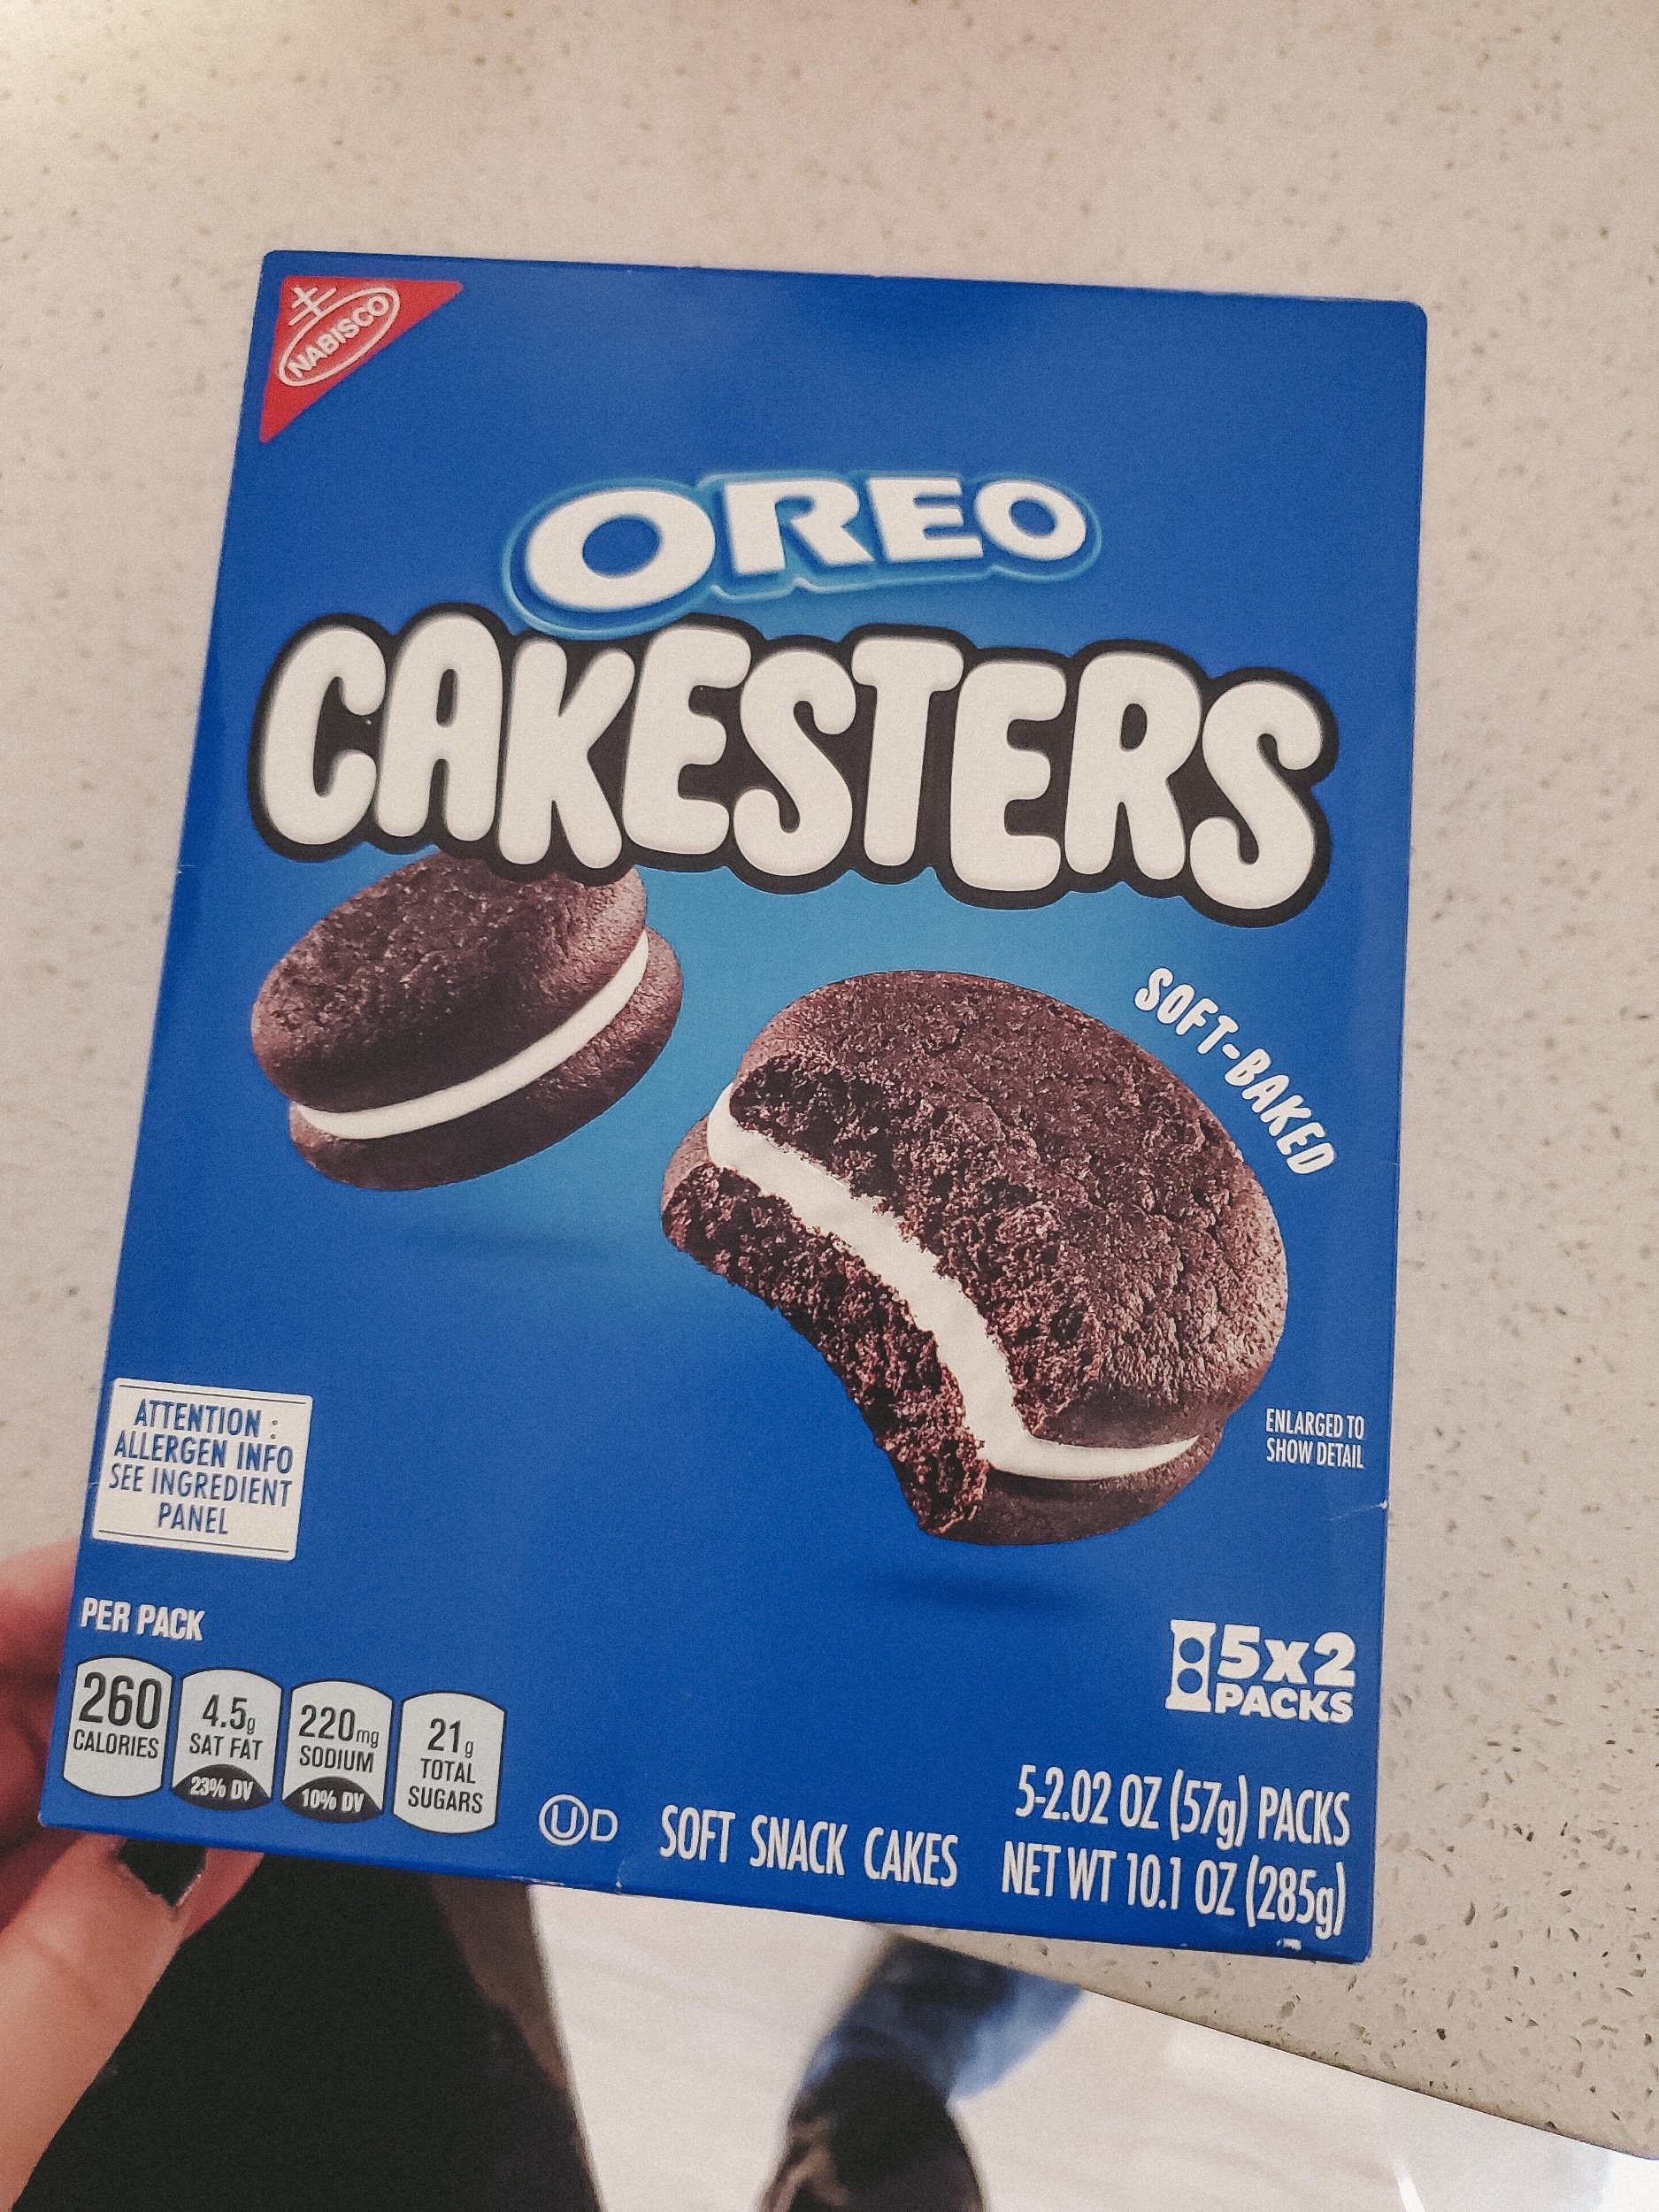 Oreo Cakesters are back. these were my first time ever having them. i really liked them.